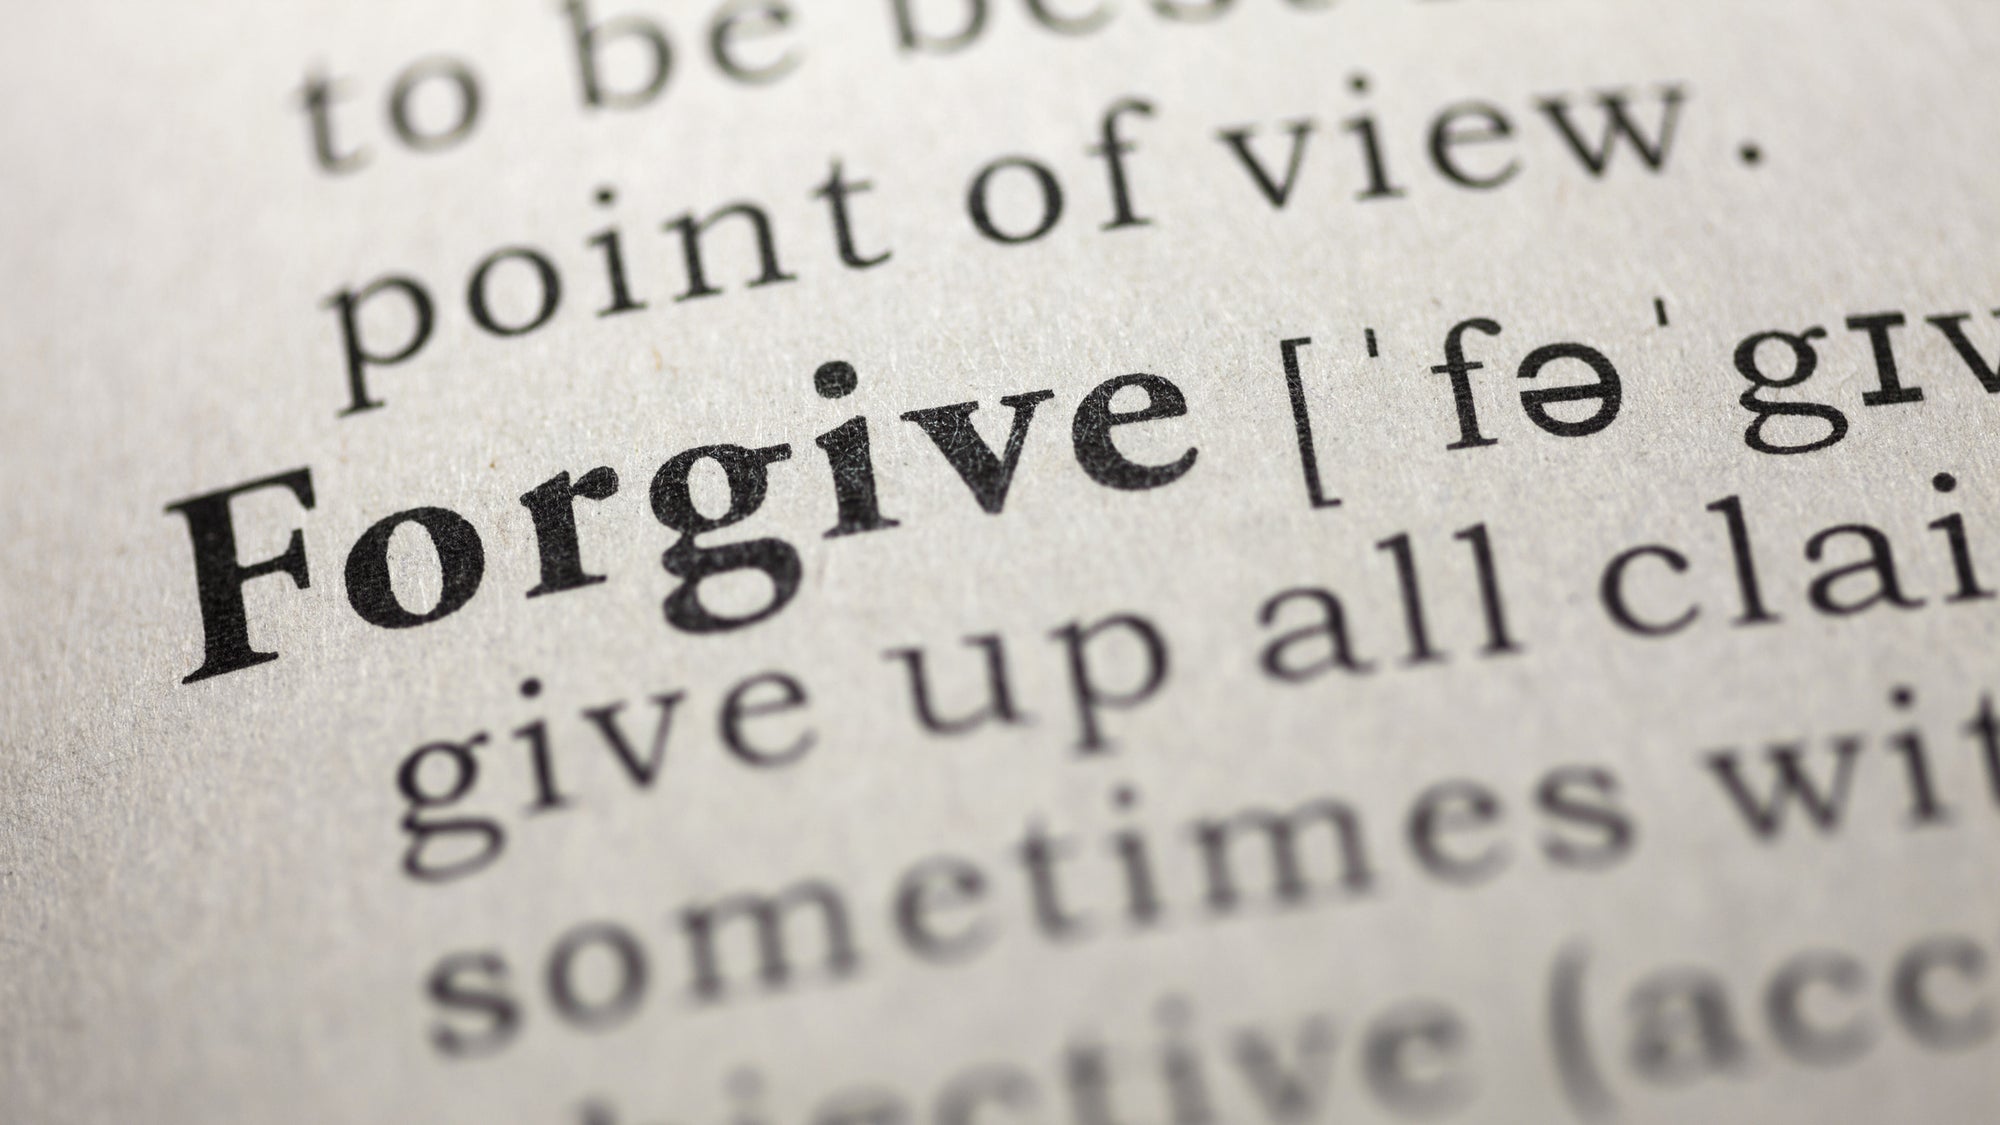 Tackling the Problems about Forgiveness